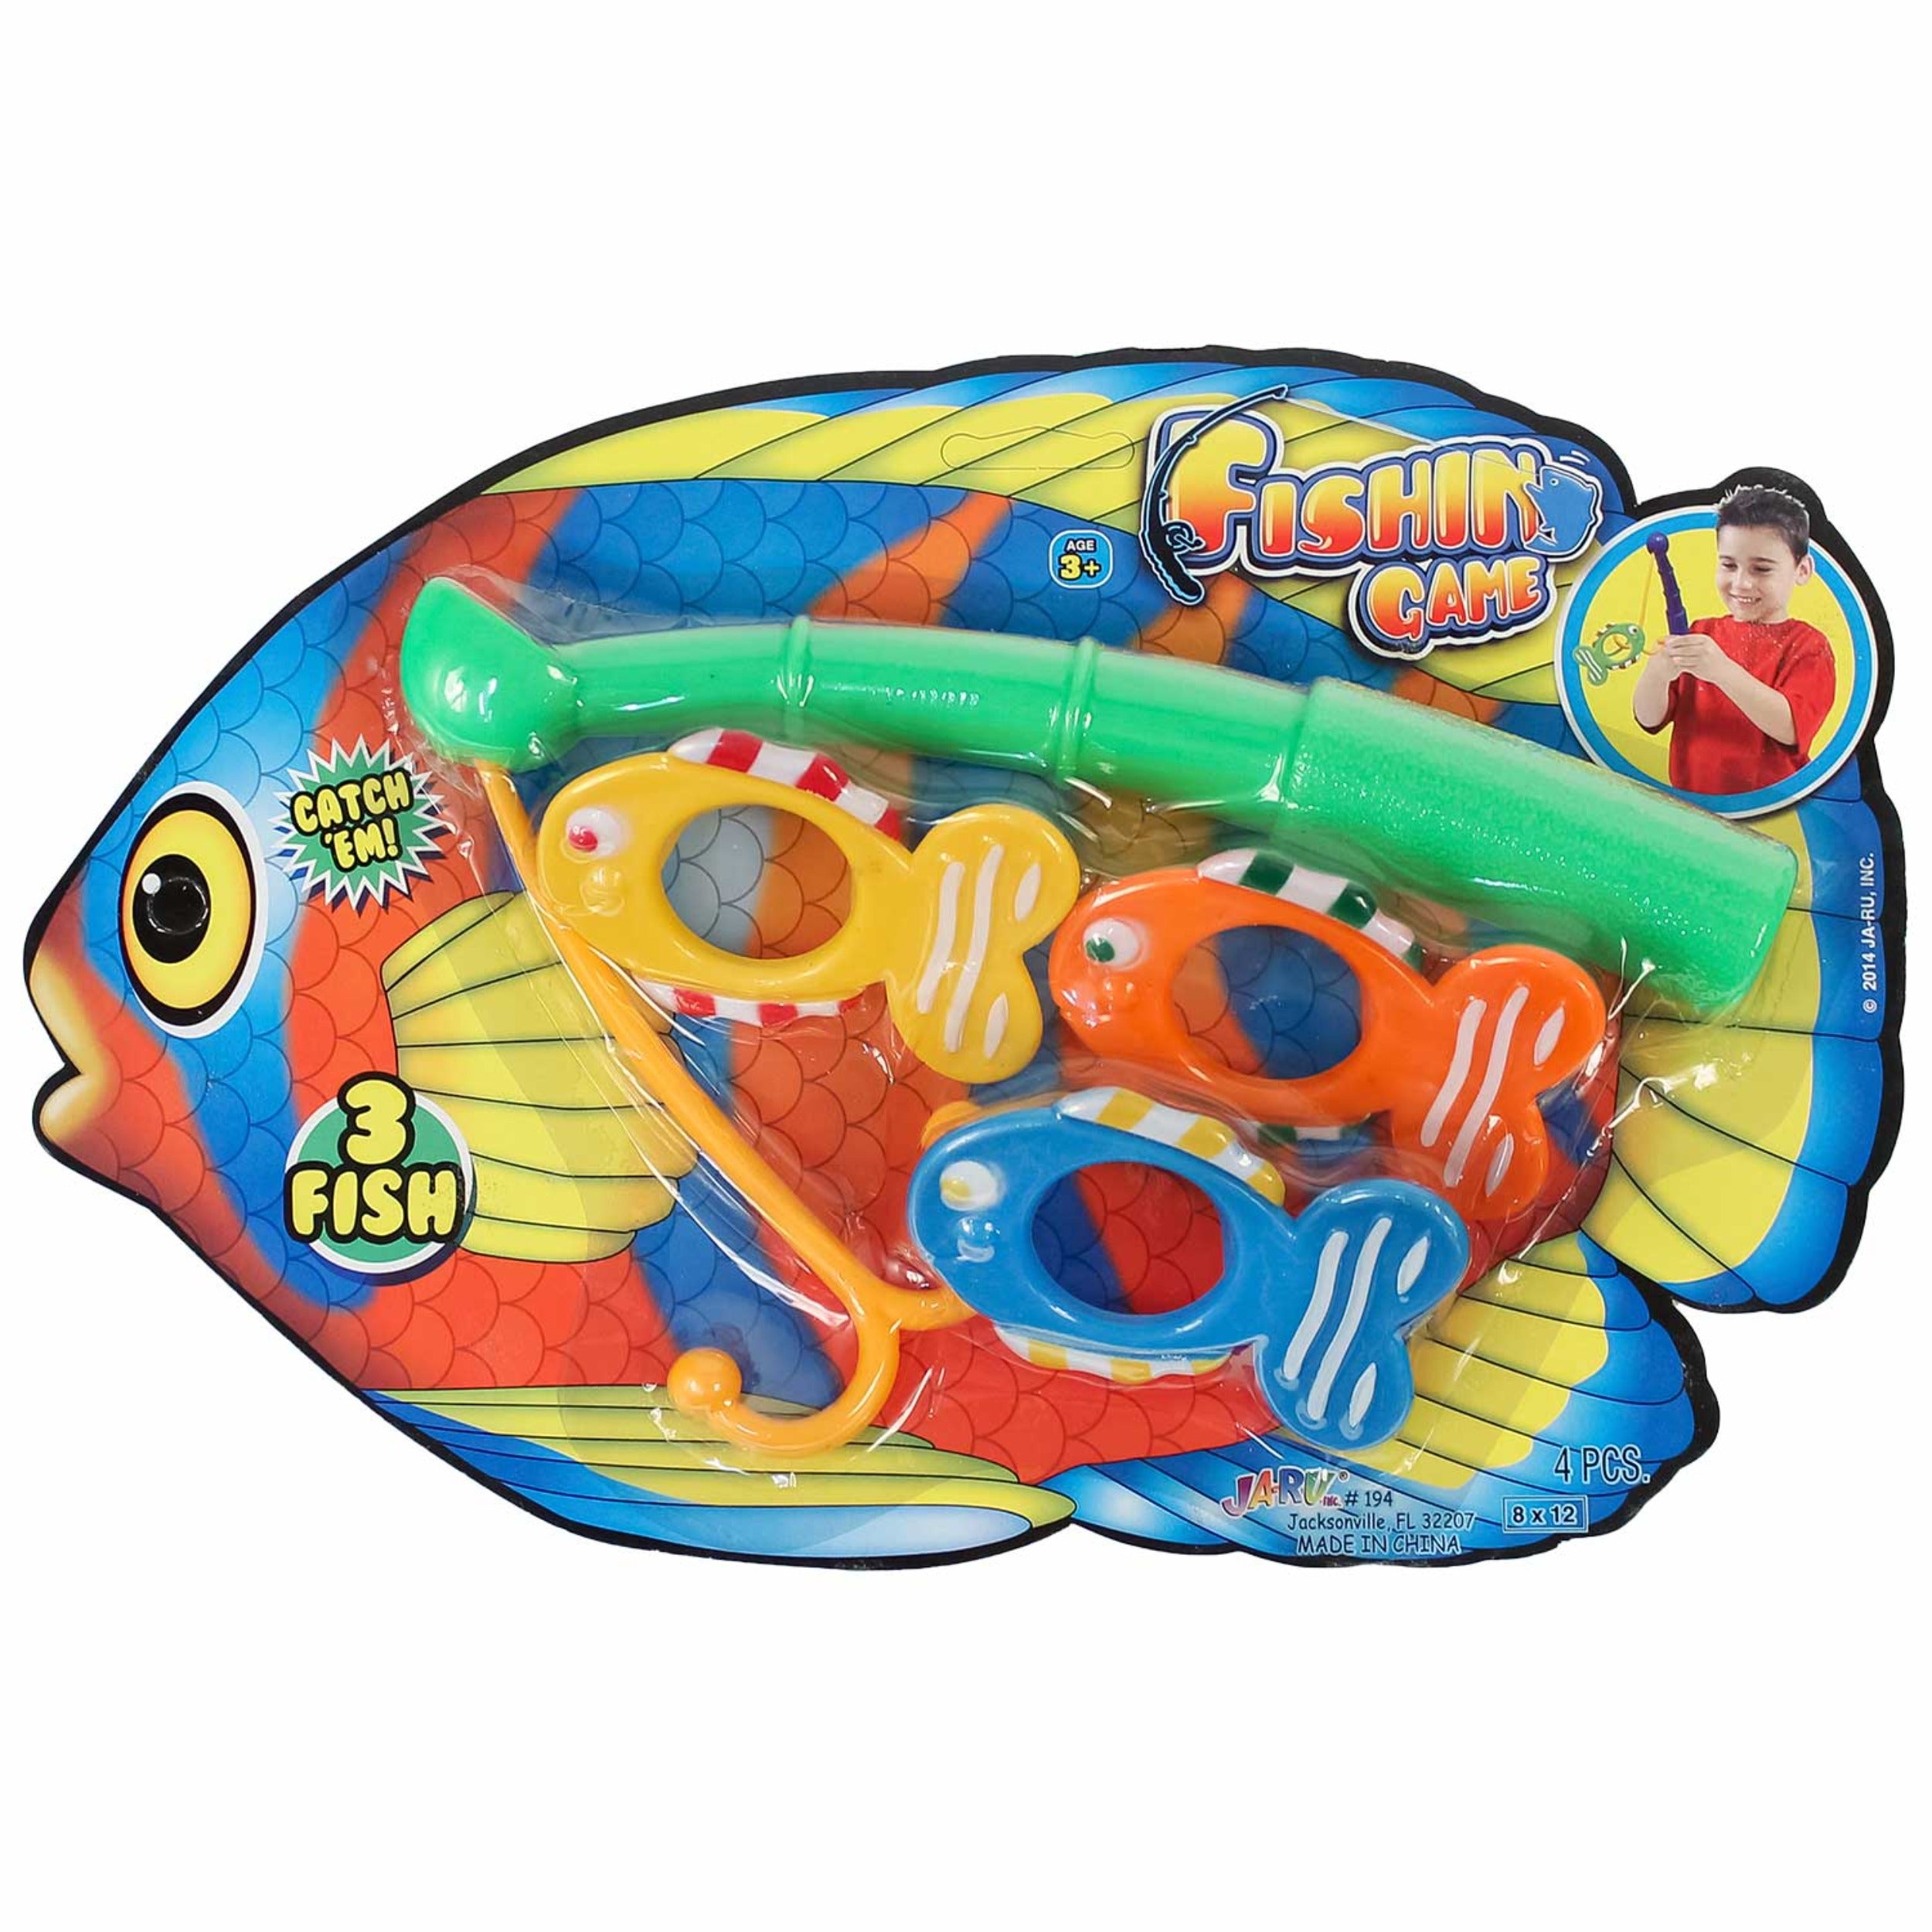 Cast and Catch Joy with Mini Fishing Kids Game Toy - 9